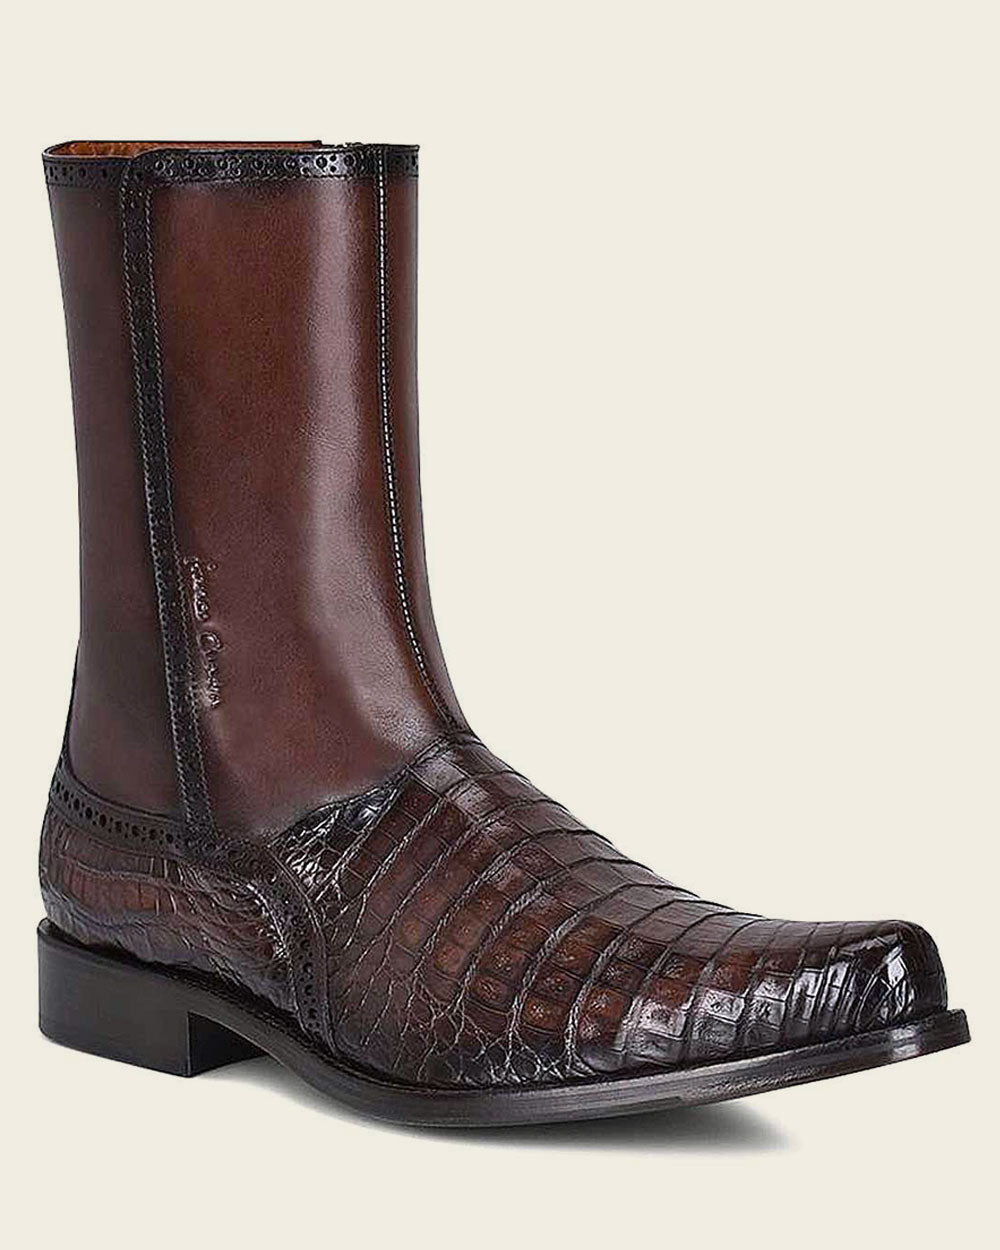 Hand-painted exotic boots: Bold statement in unique cayman & bovine leather.